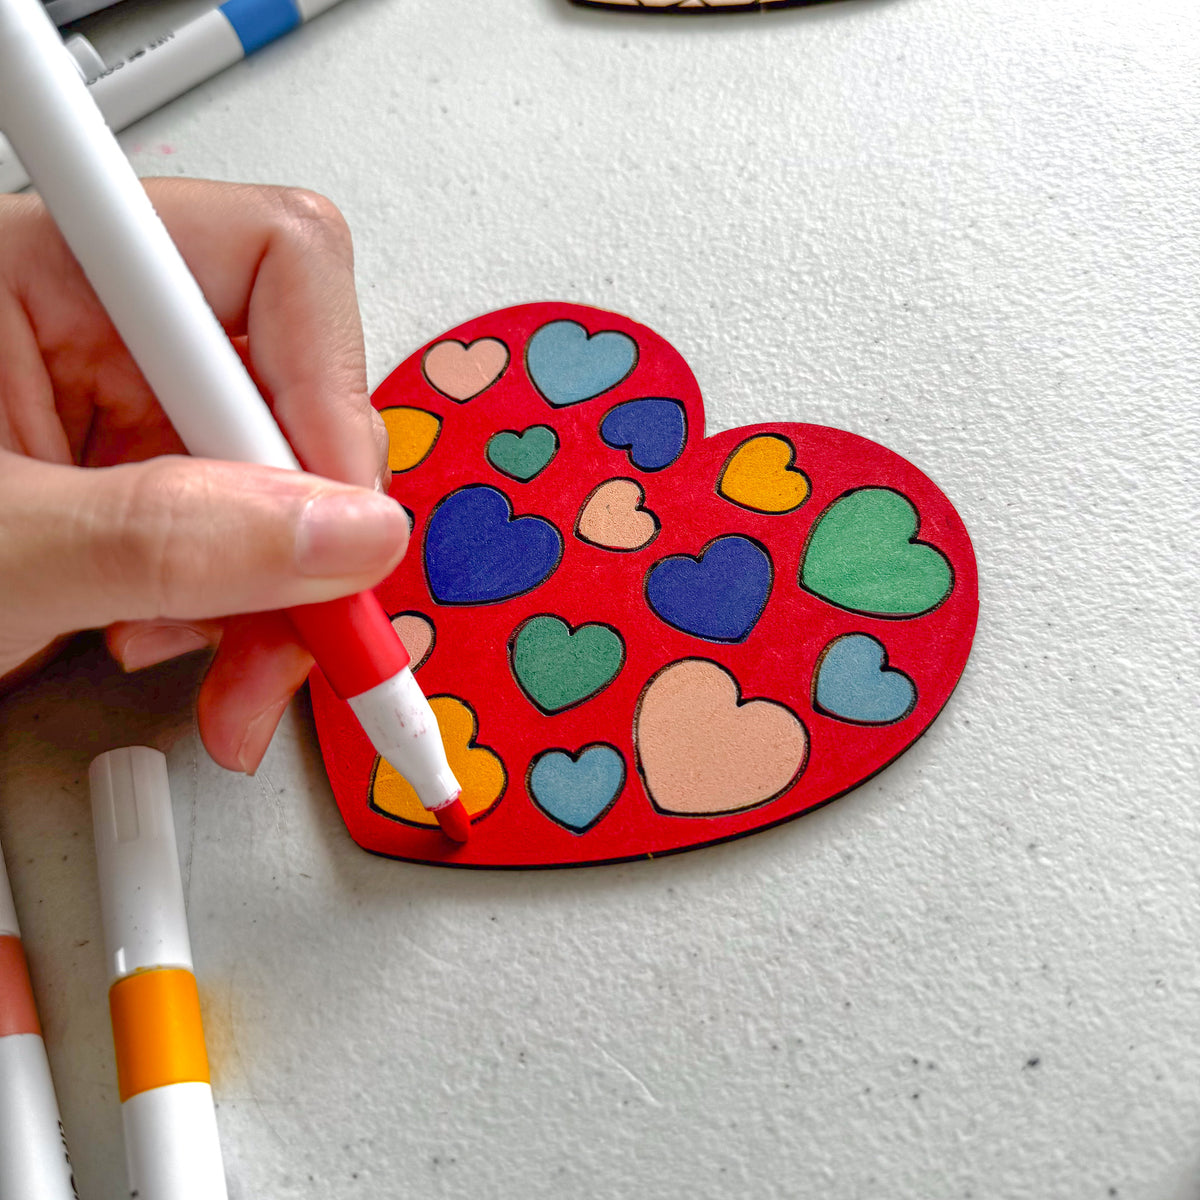 Colourful Hearts Mega Valentine&#39;s Day Gift Set - 4 Love Heart coasters, 1 Large Hearts Board and Love Tote Bag with acrylic markers